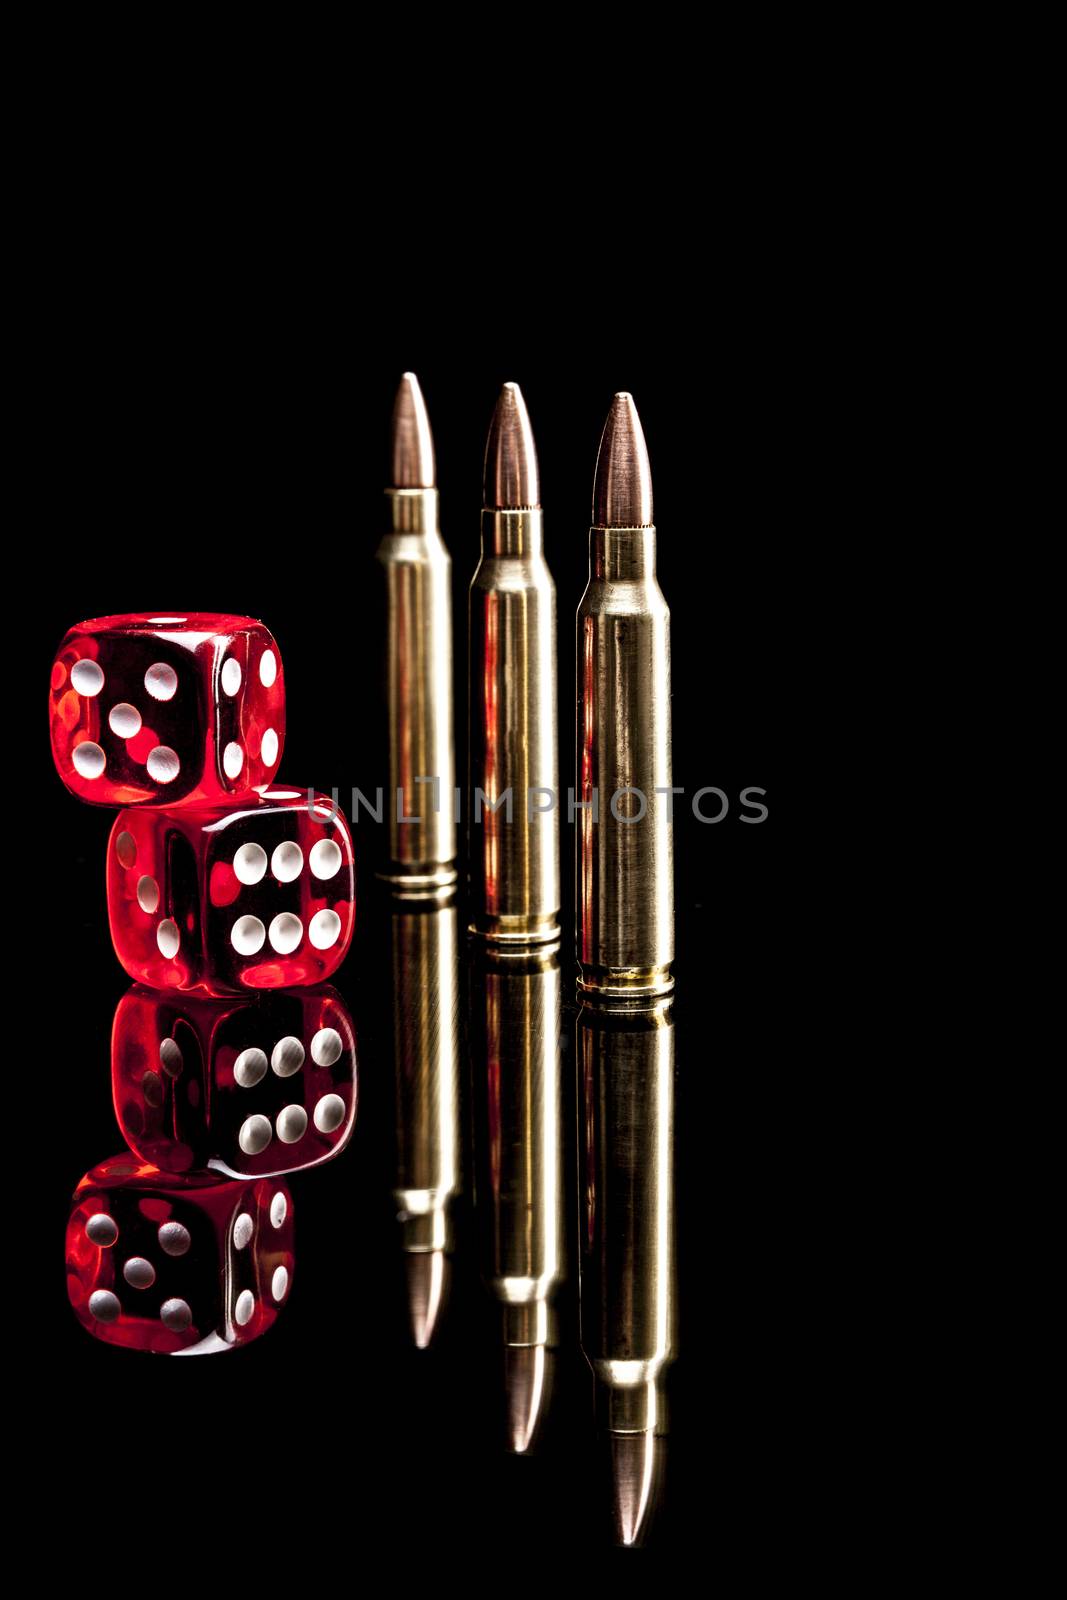 Bullets and Dices by orcearo